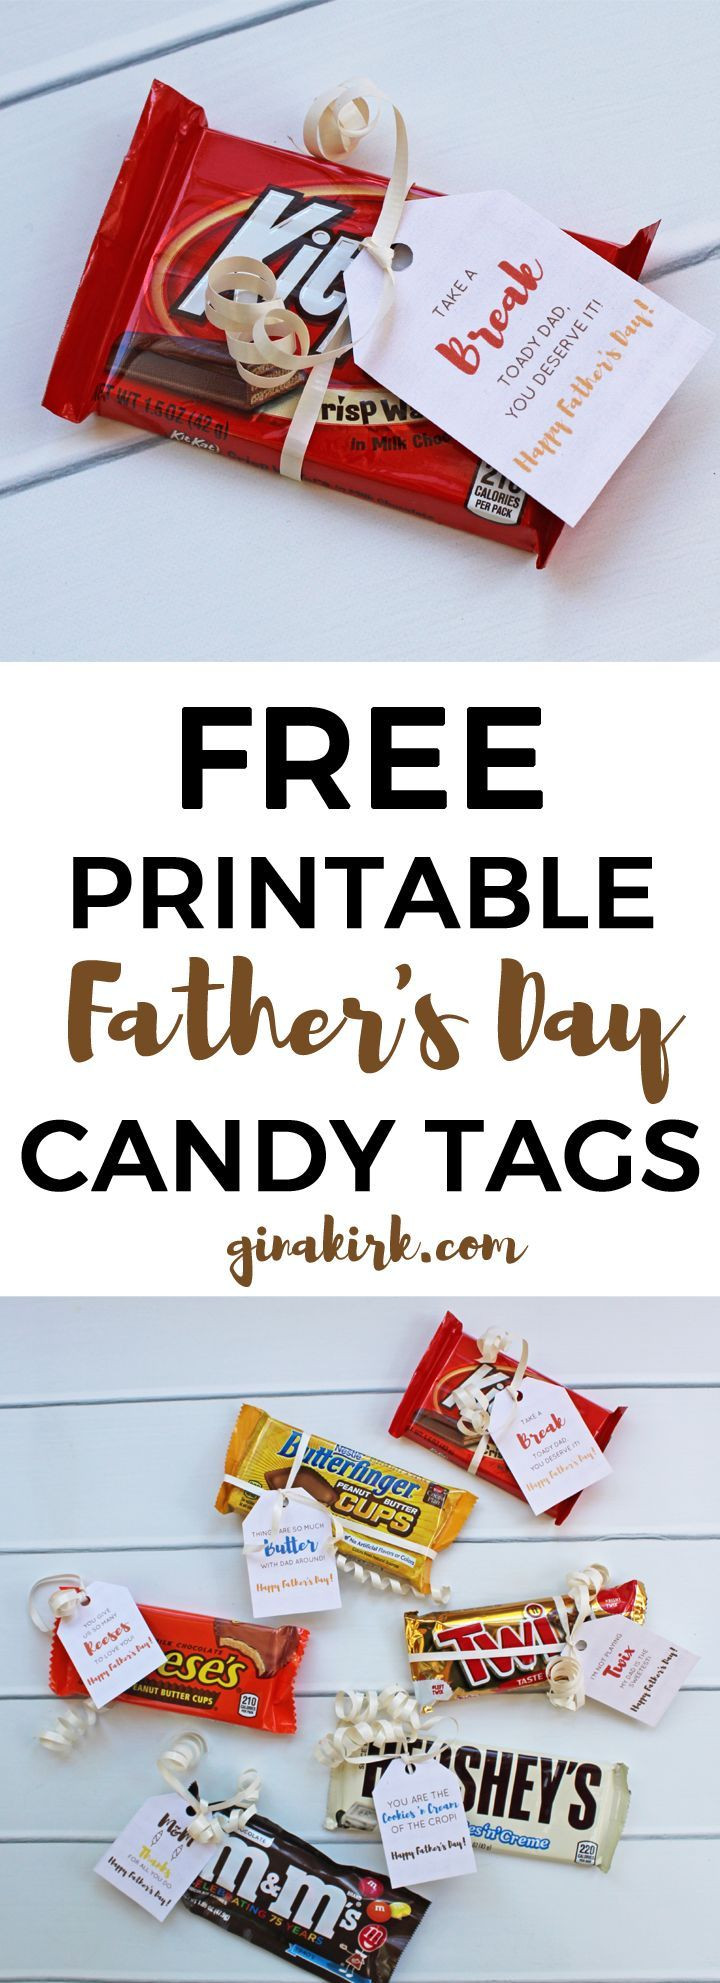 Mother'S Day Gift Ideas For Churches
 Free Printable Candy Tags for Father s Day